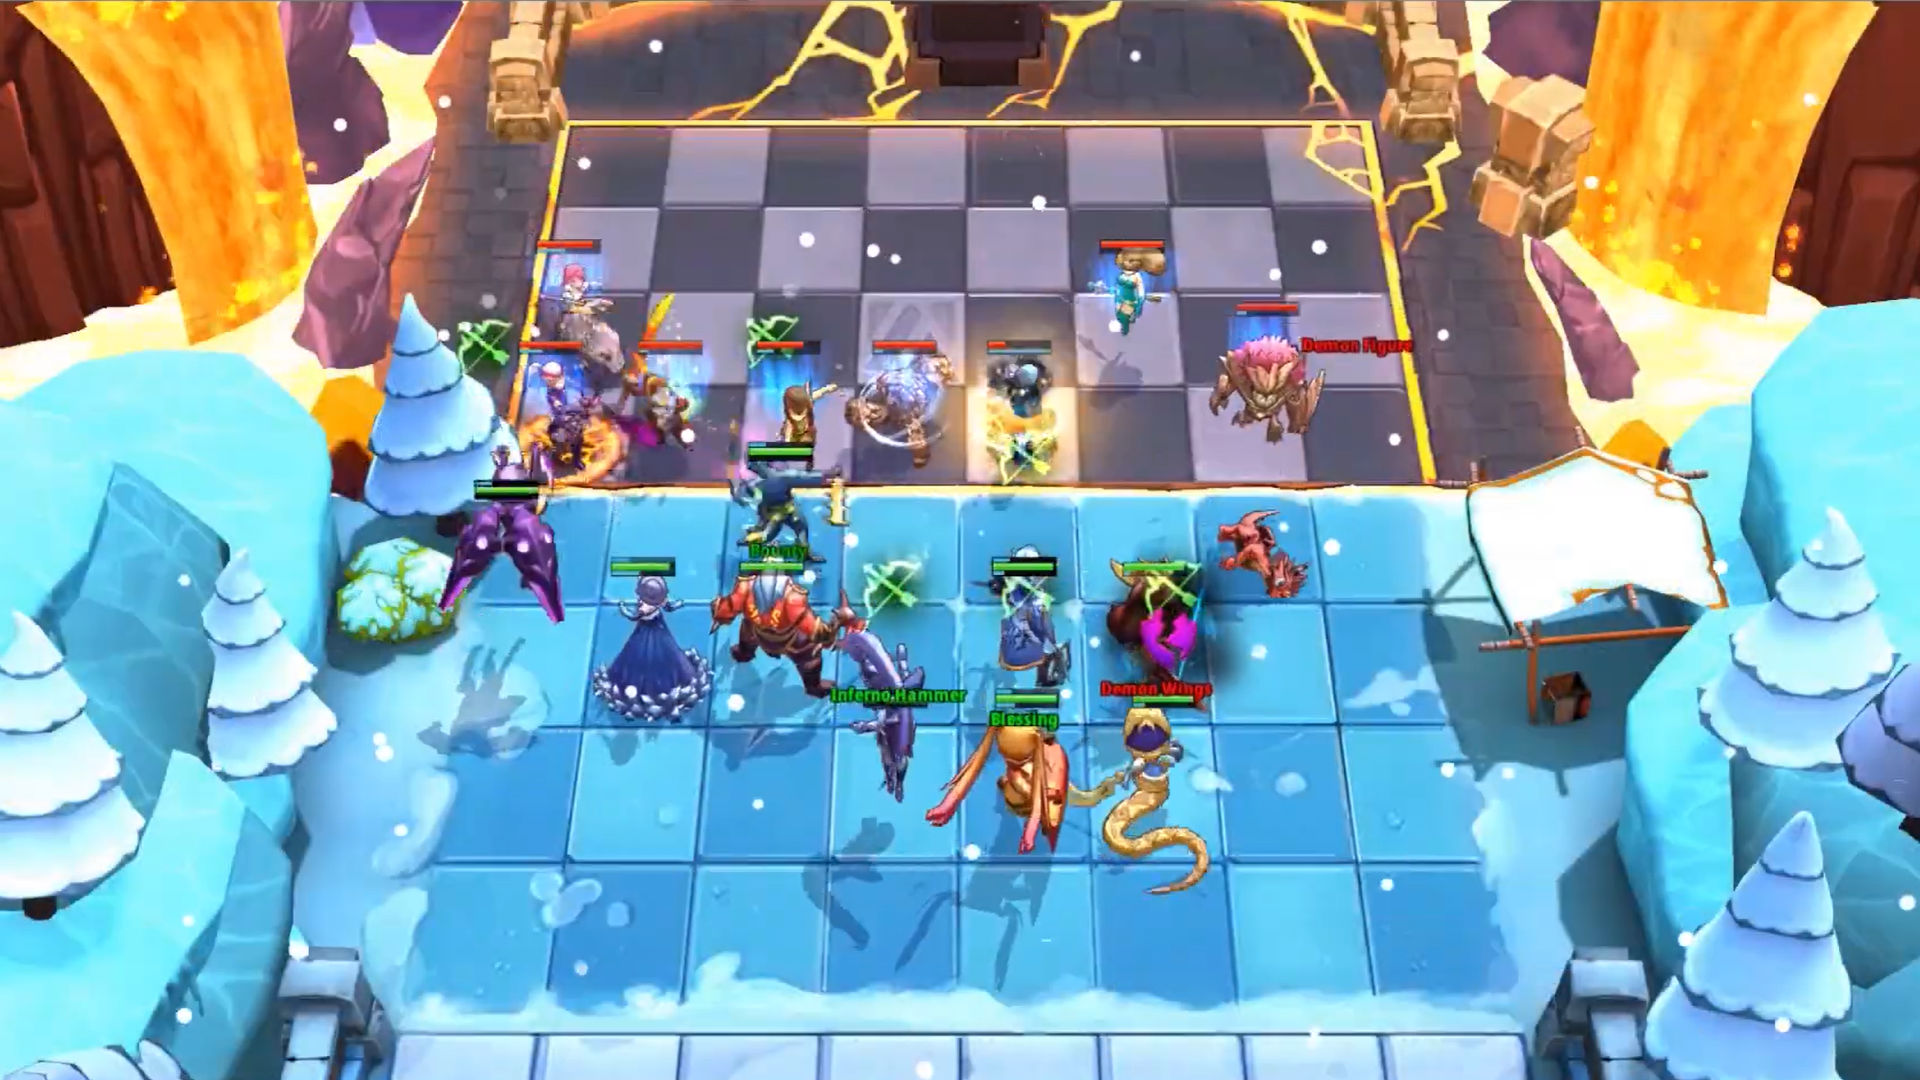 Auto Chess' for Mobile Preview – Too Long, Couldn't Read – TouchArcade